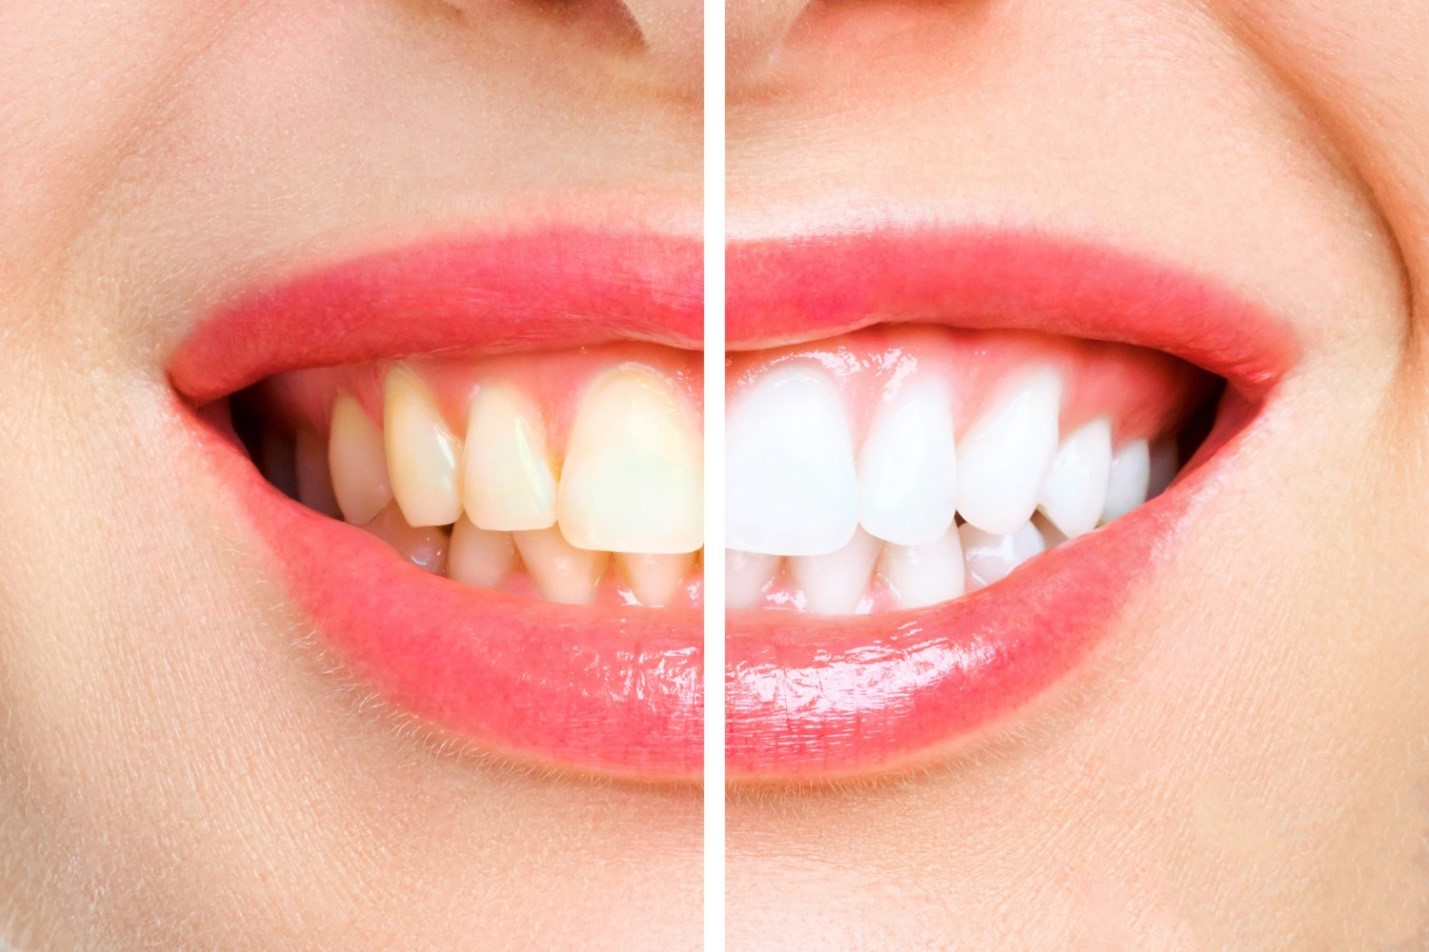 Teeth Whitening Questions To Ask From Your Dentist